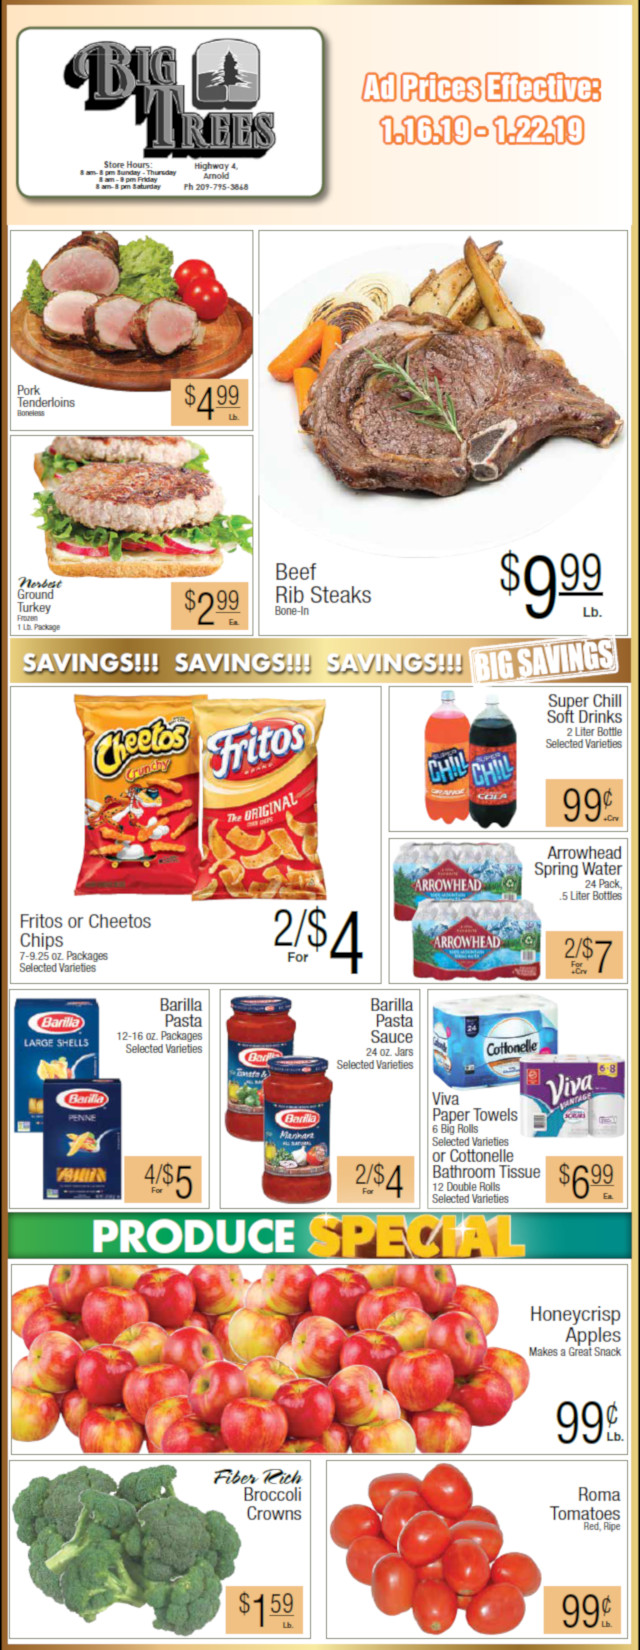 Big Trees Market Weekly Ad & Grocery Specials Through January 22nd